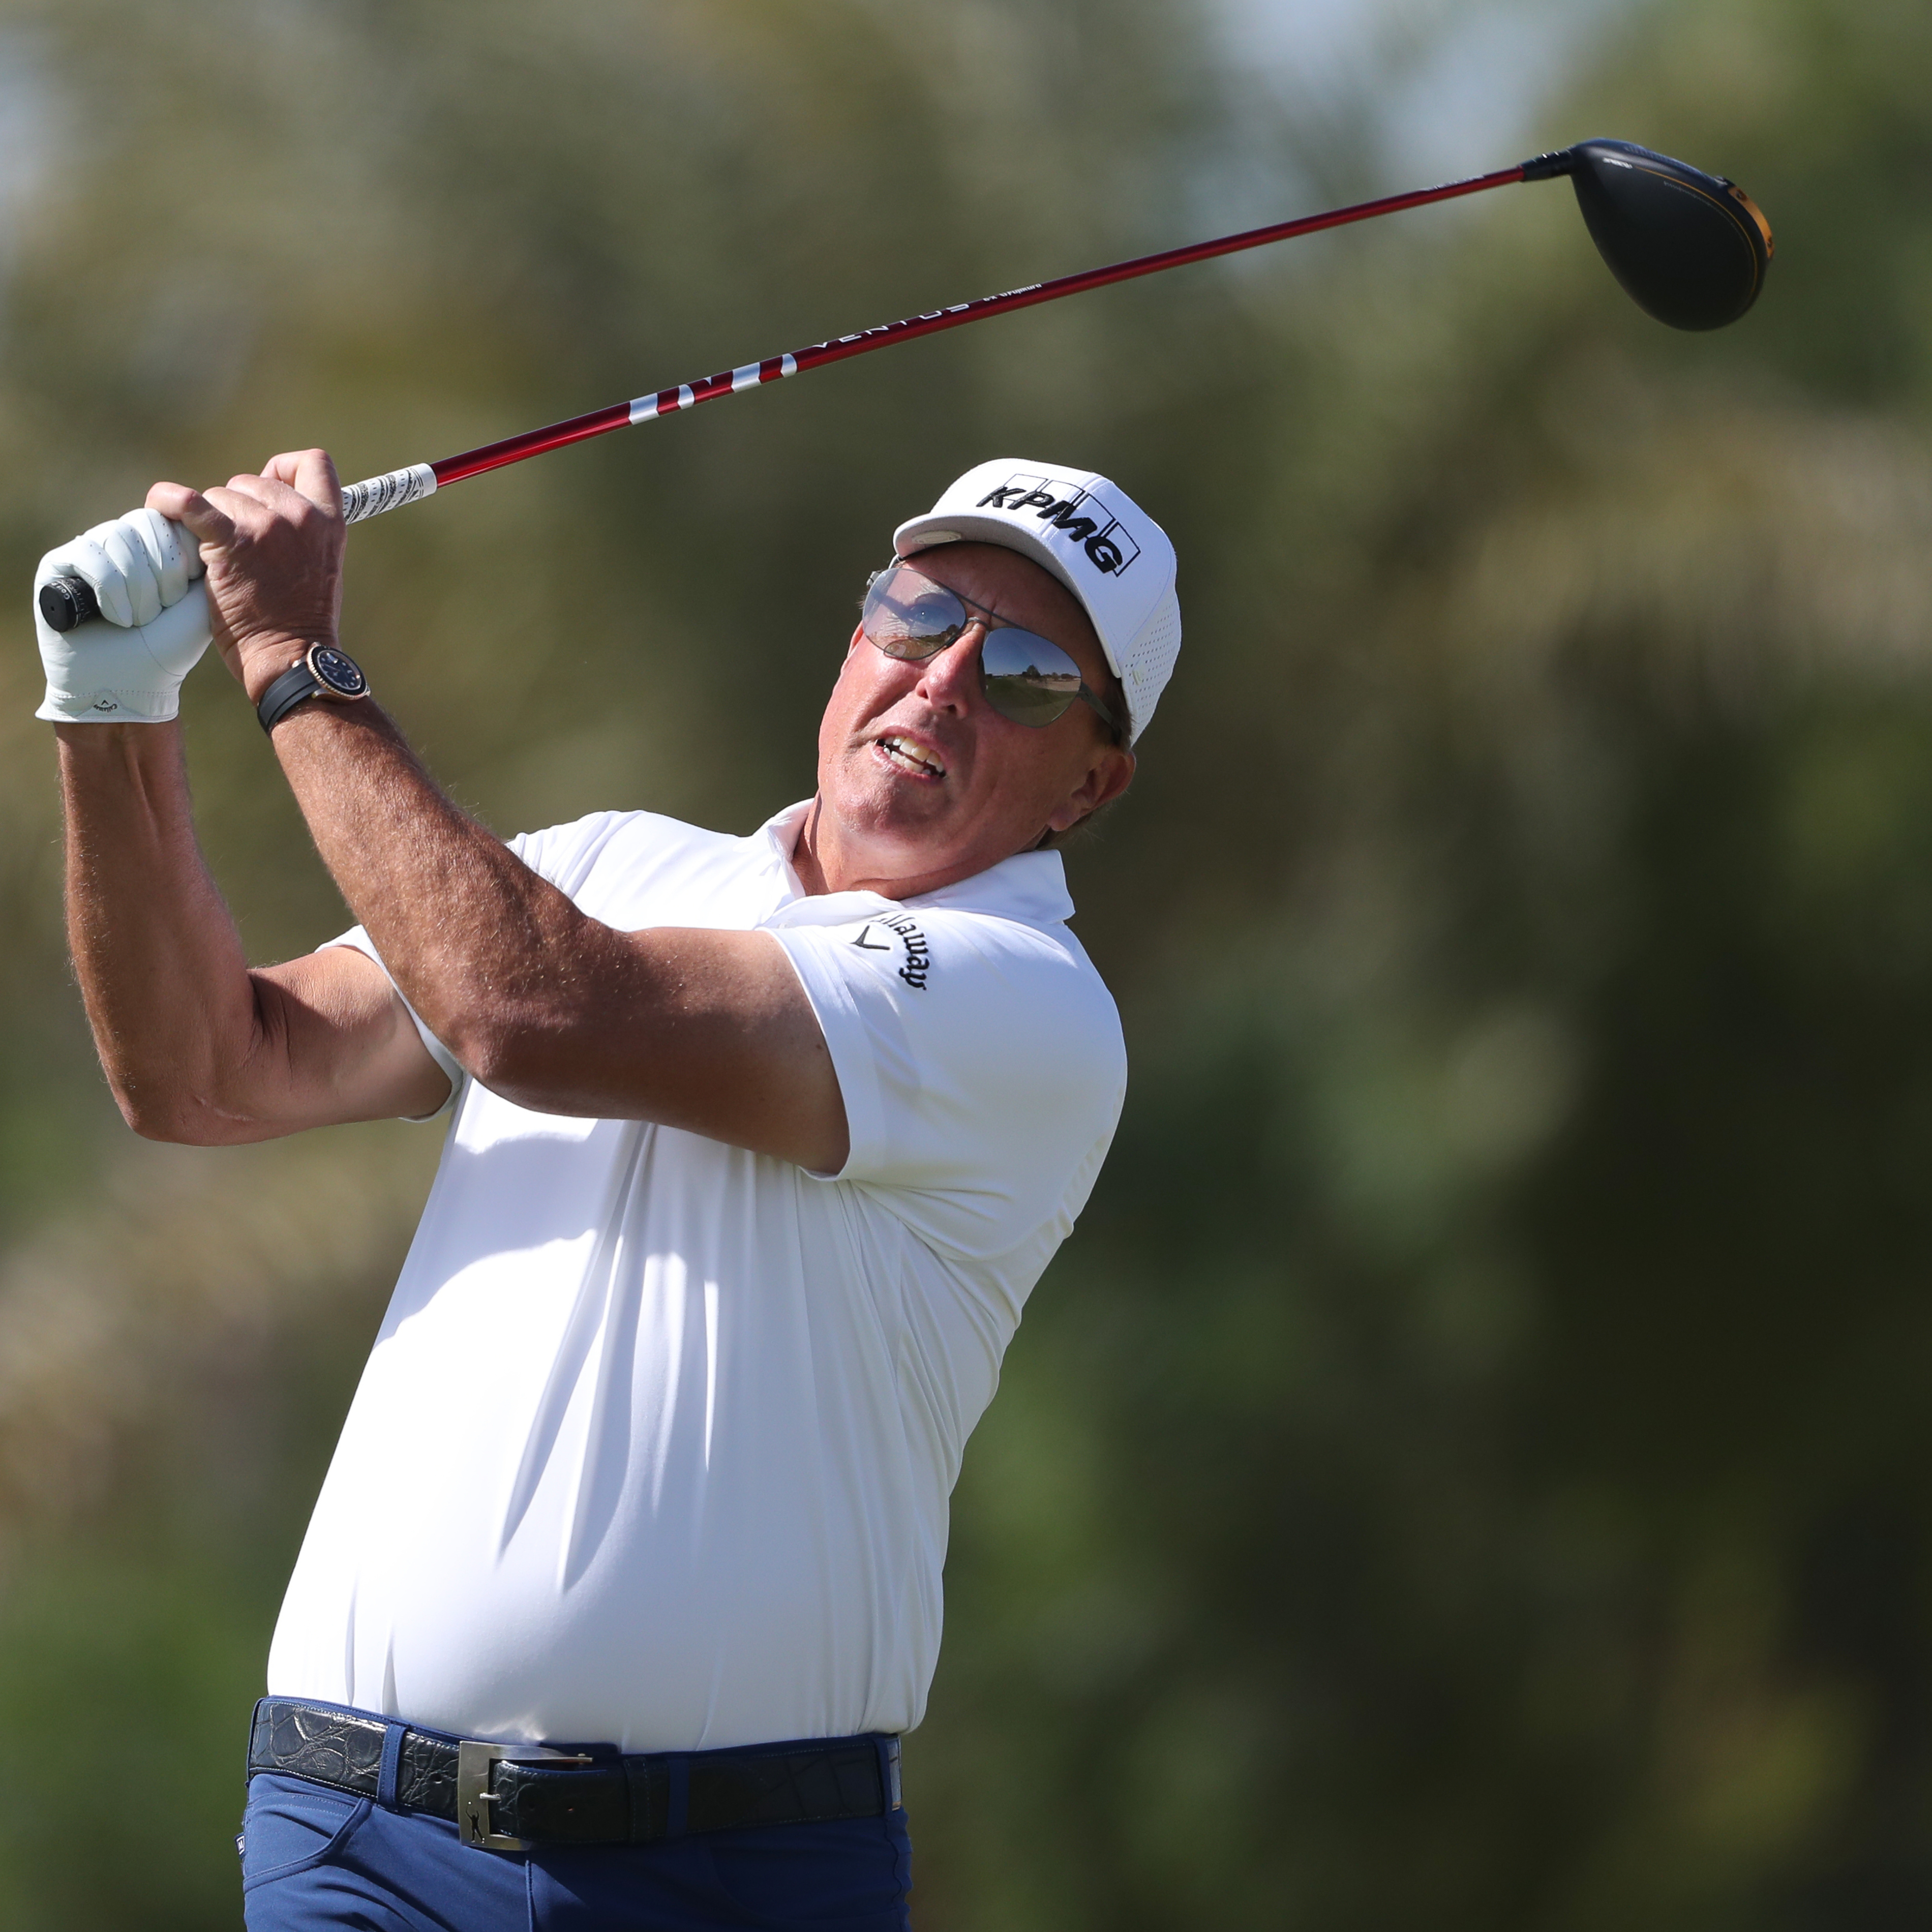 Phil Mickelson Reportedly Lost $40M Gambling Between 2010 and 2014